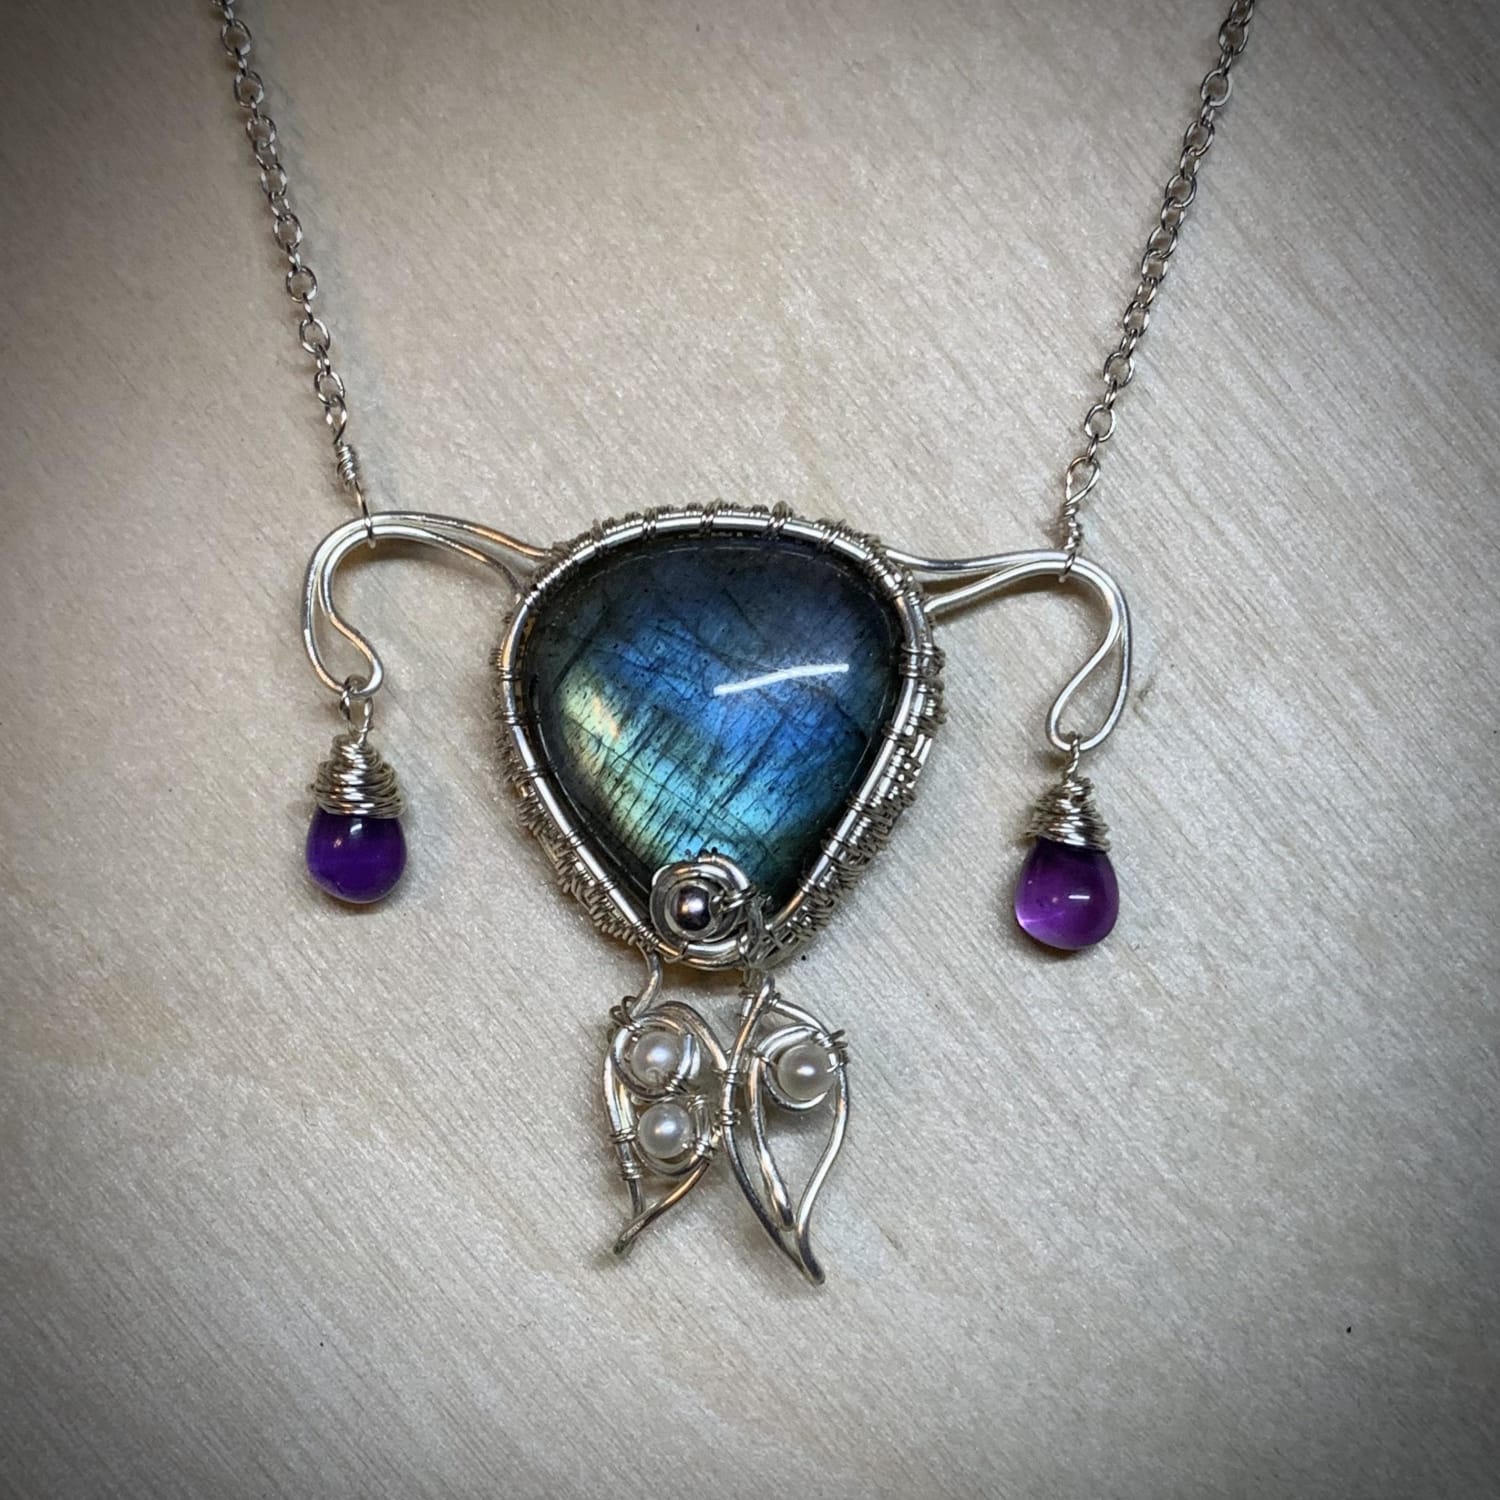 I made an uterus necklace with sterling silver wire, labradorite gemstone, and amethyst beads.